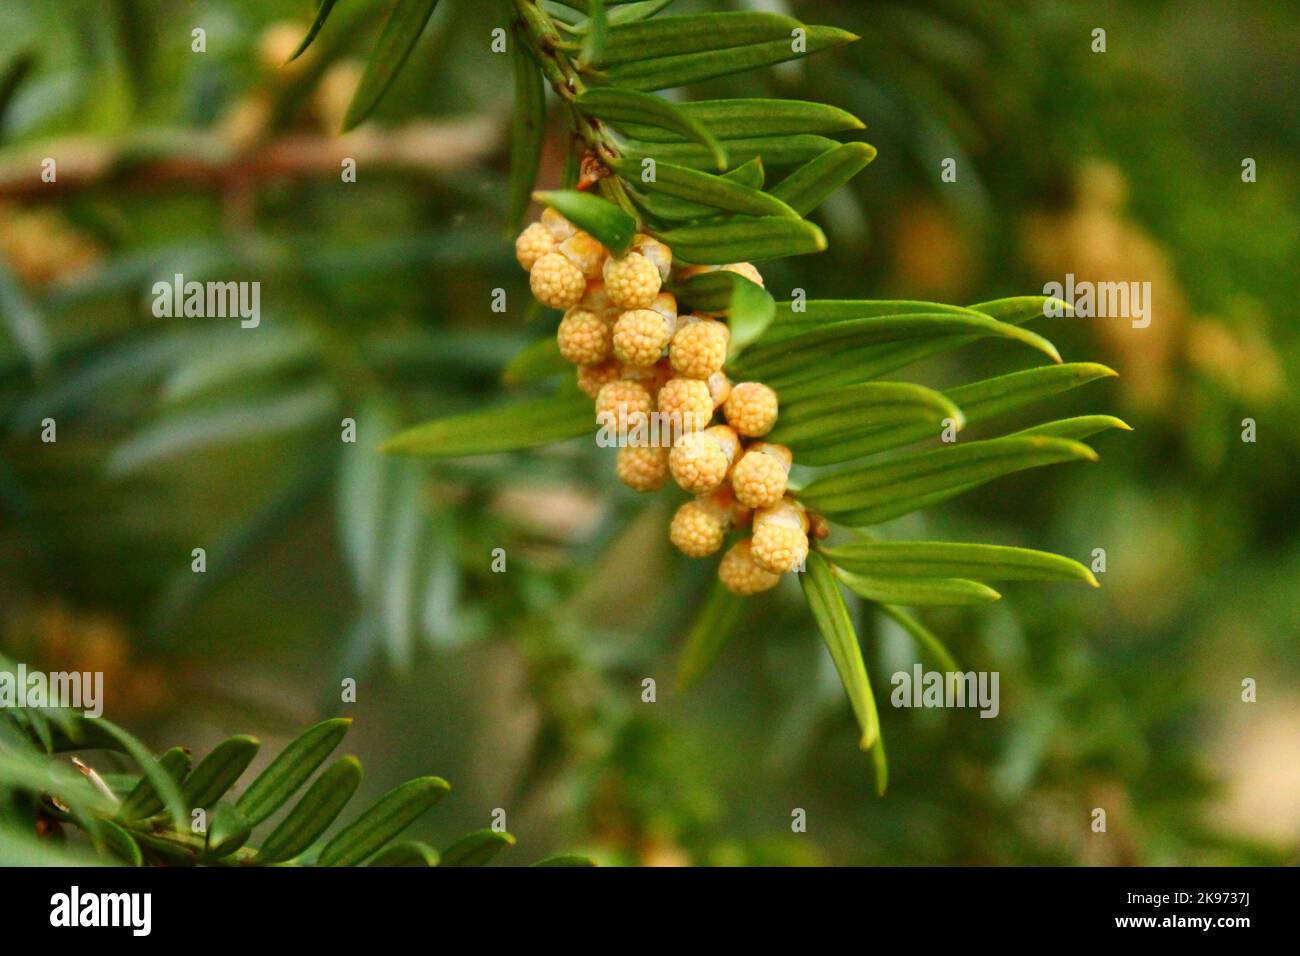 A closeup shot of yellow yew fruits on tree branches against a blurred background Stock Photo